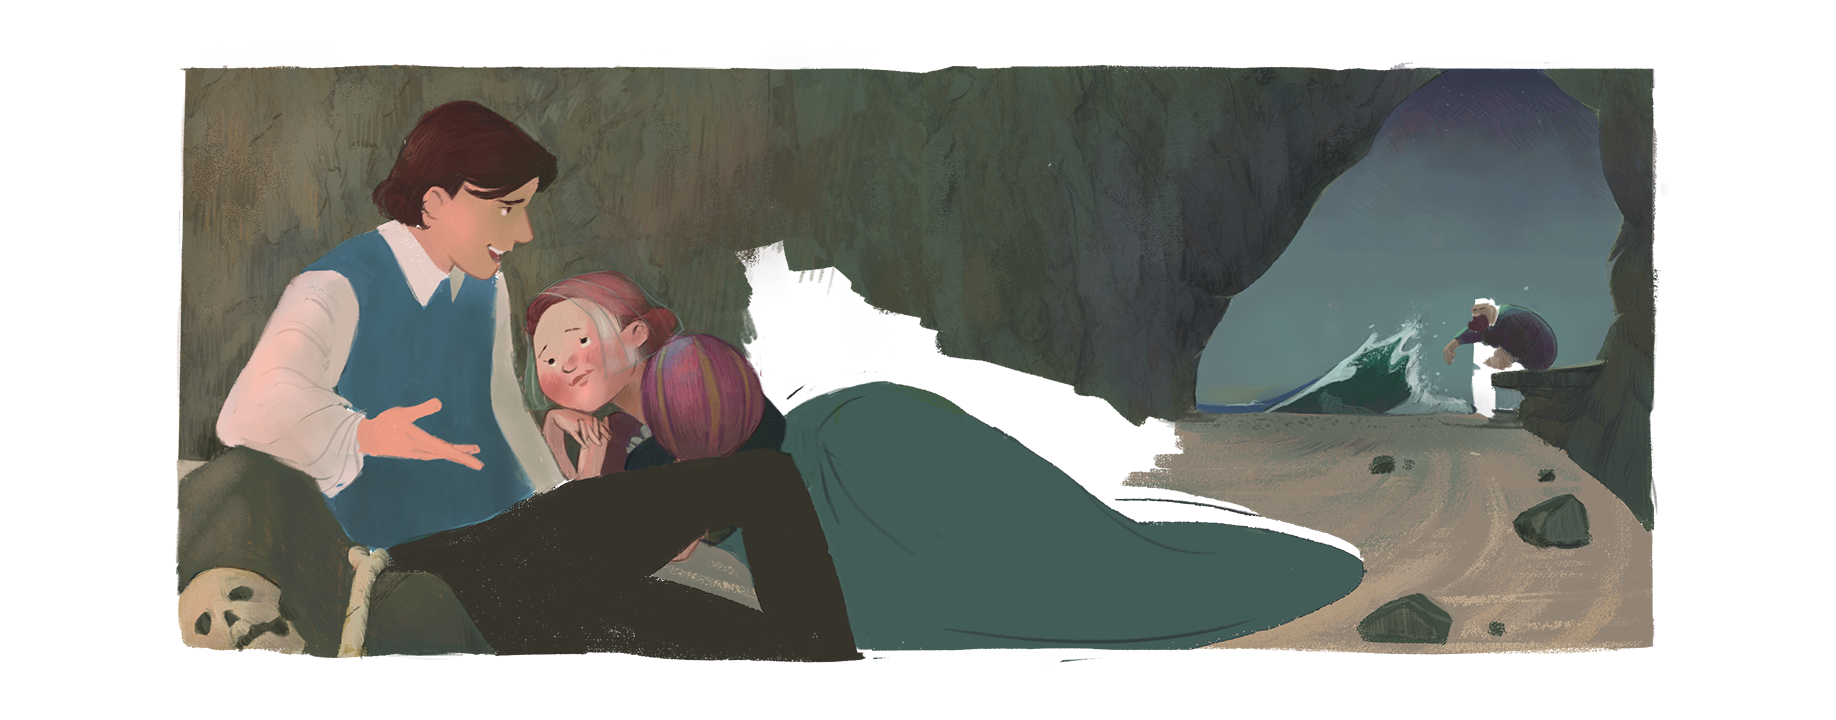 in_the_cave_wip.png